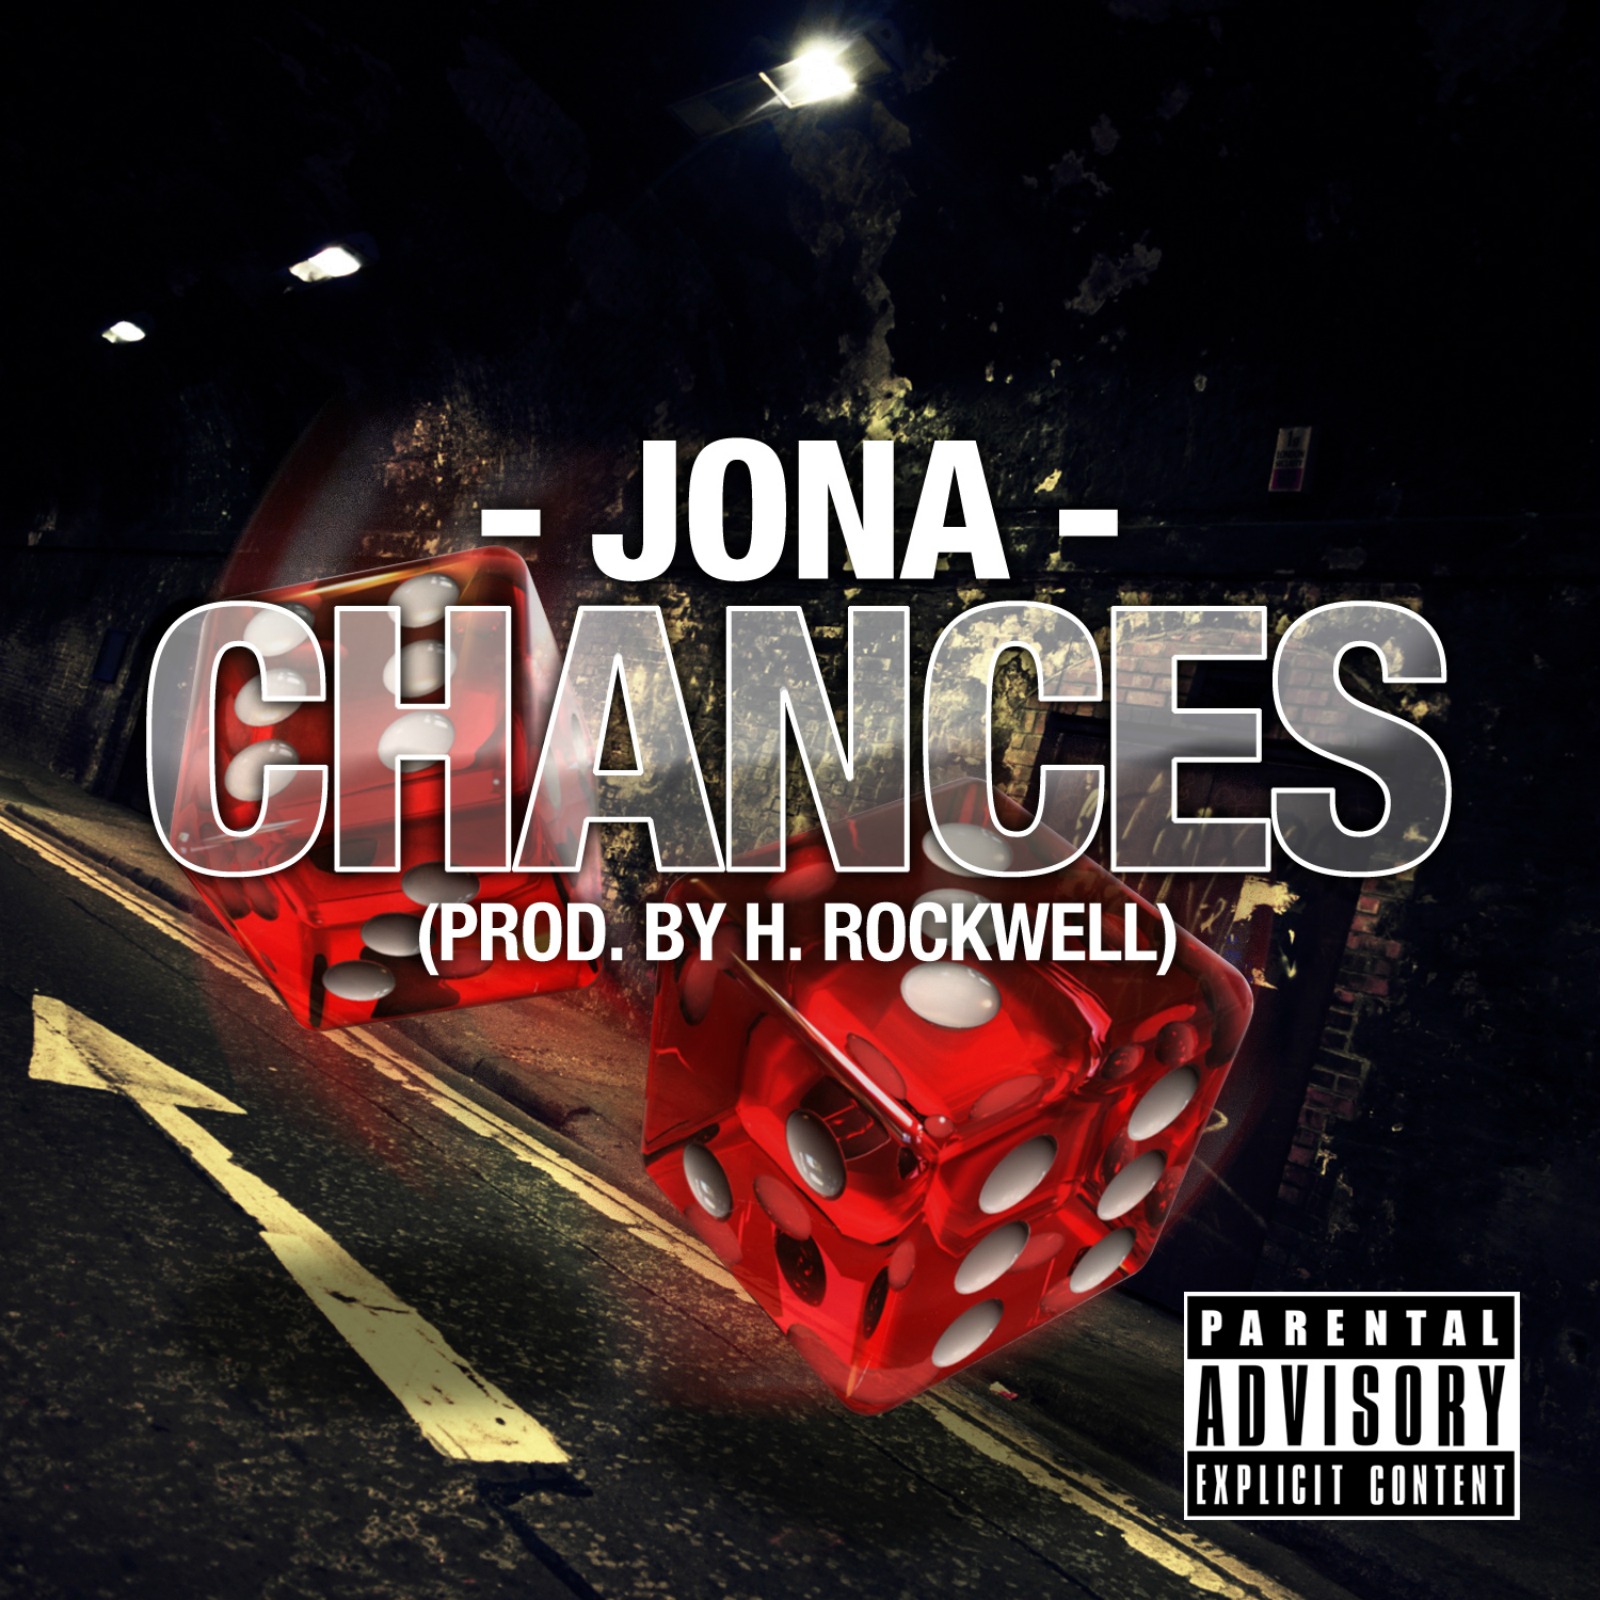 Jona - "Chances" (Produced by H. Rockwell)